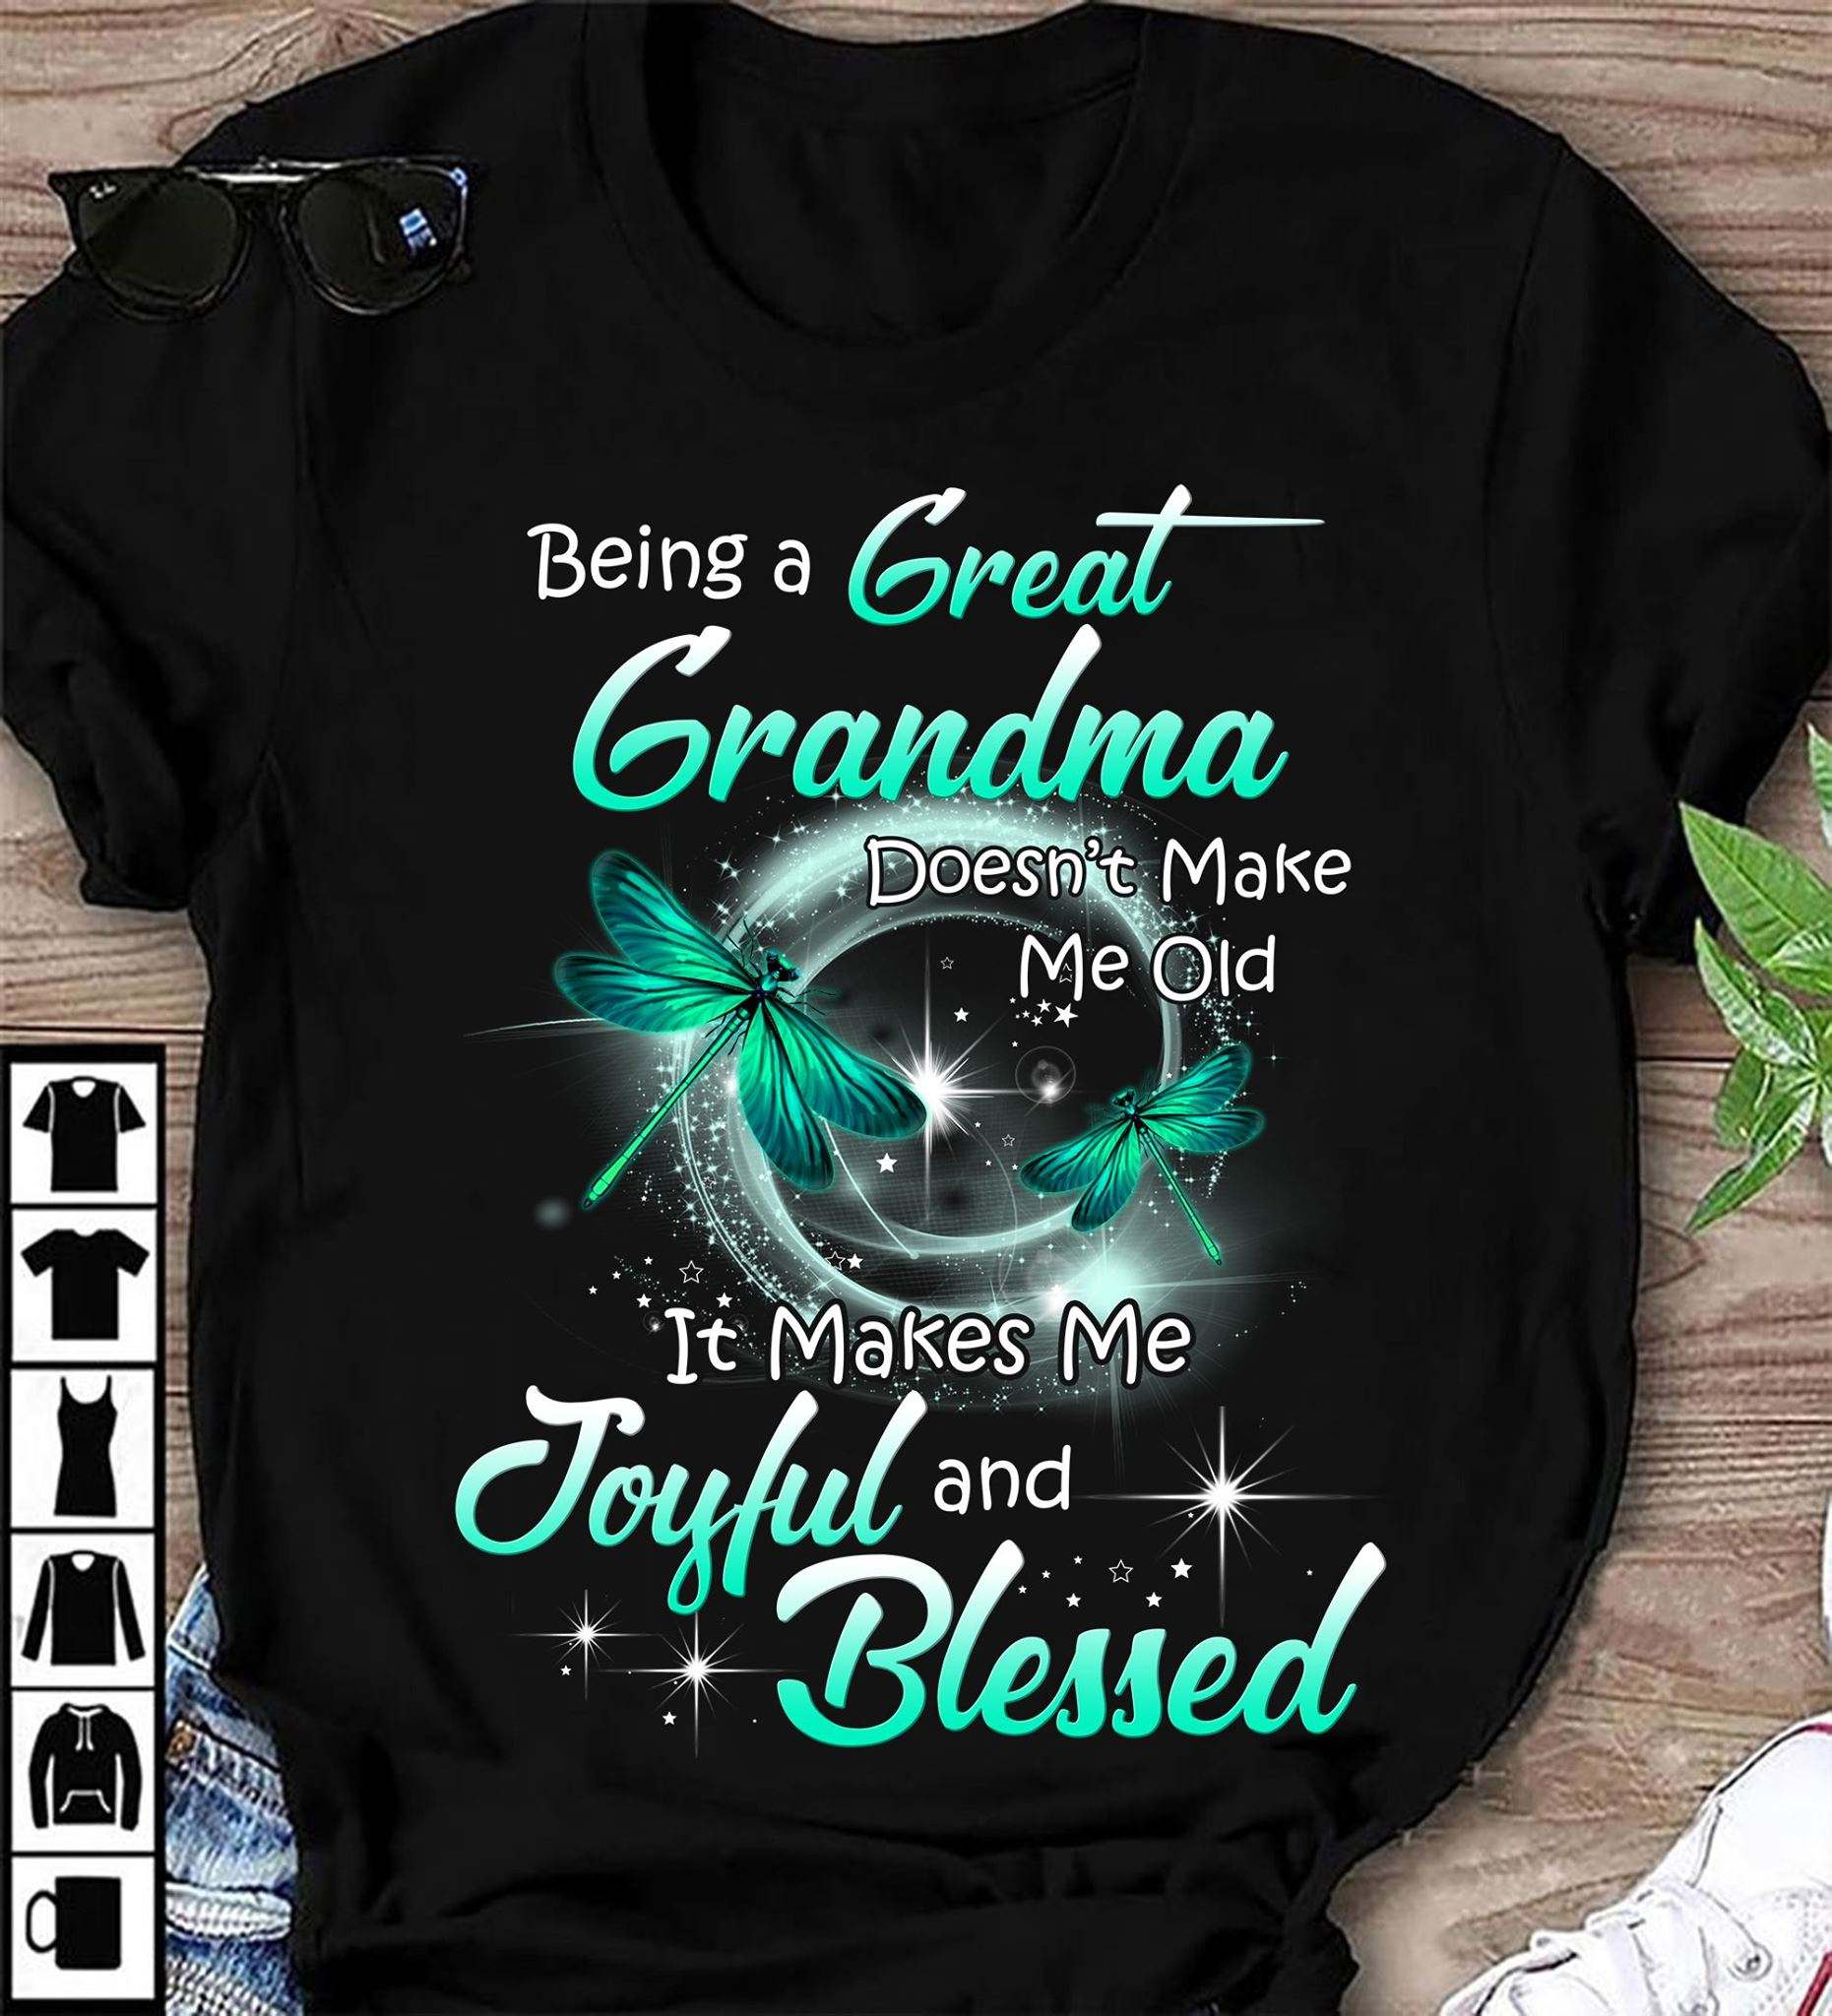 Being a great grandma doesn't make me old it makes me joyful and blessed - Dragon fly